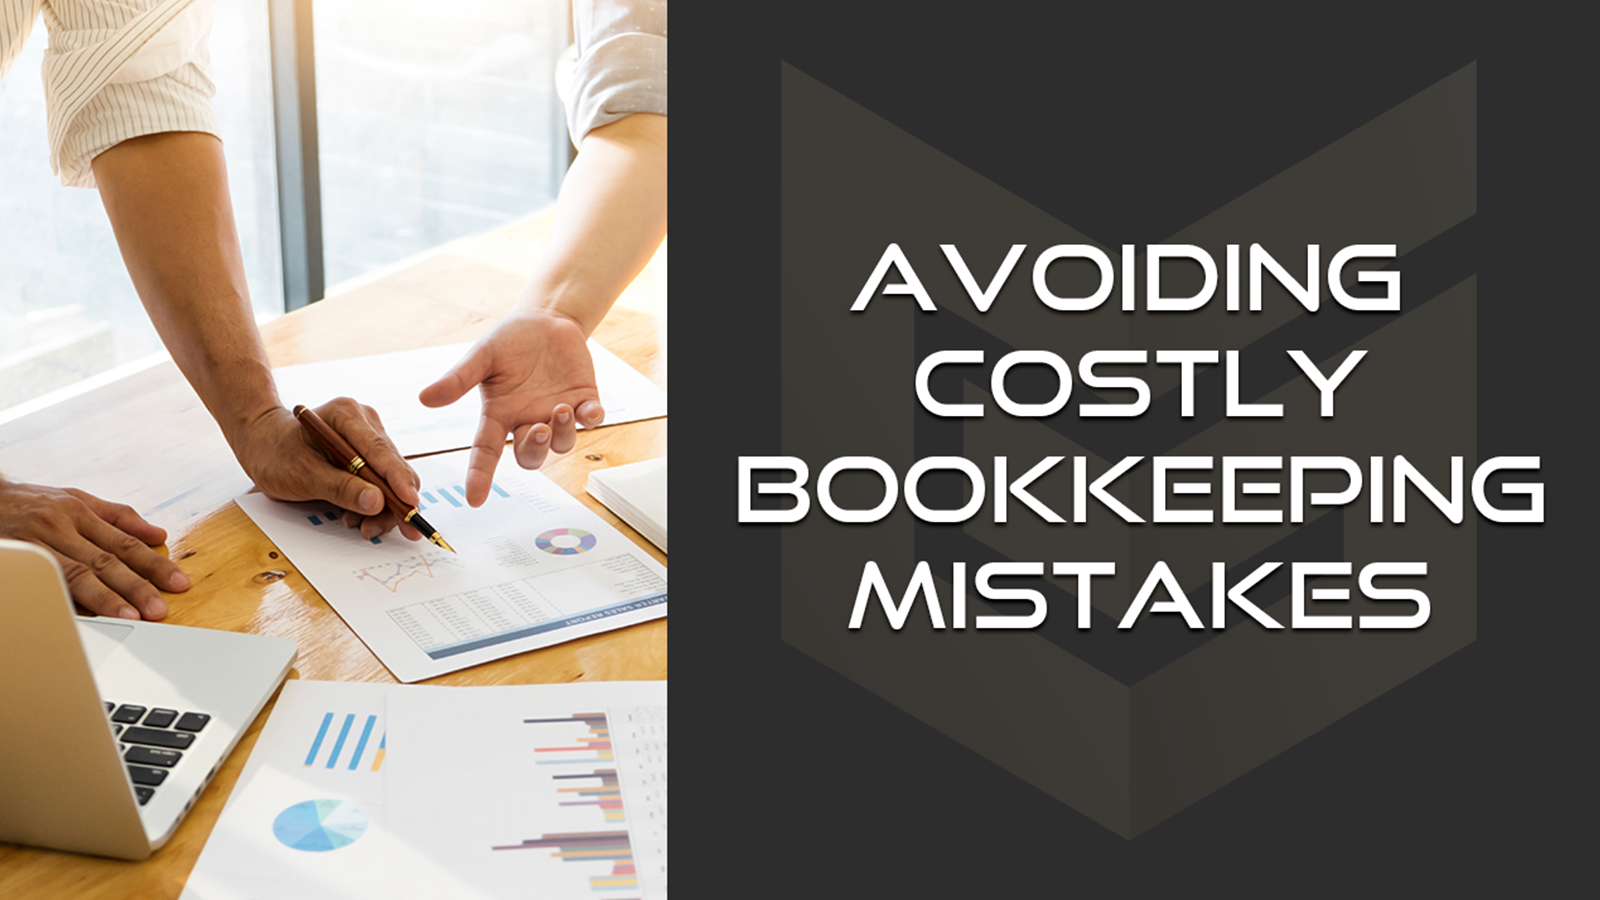 Image with the text Avoiding Costly Bookkeeping Mistakes